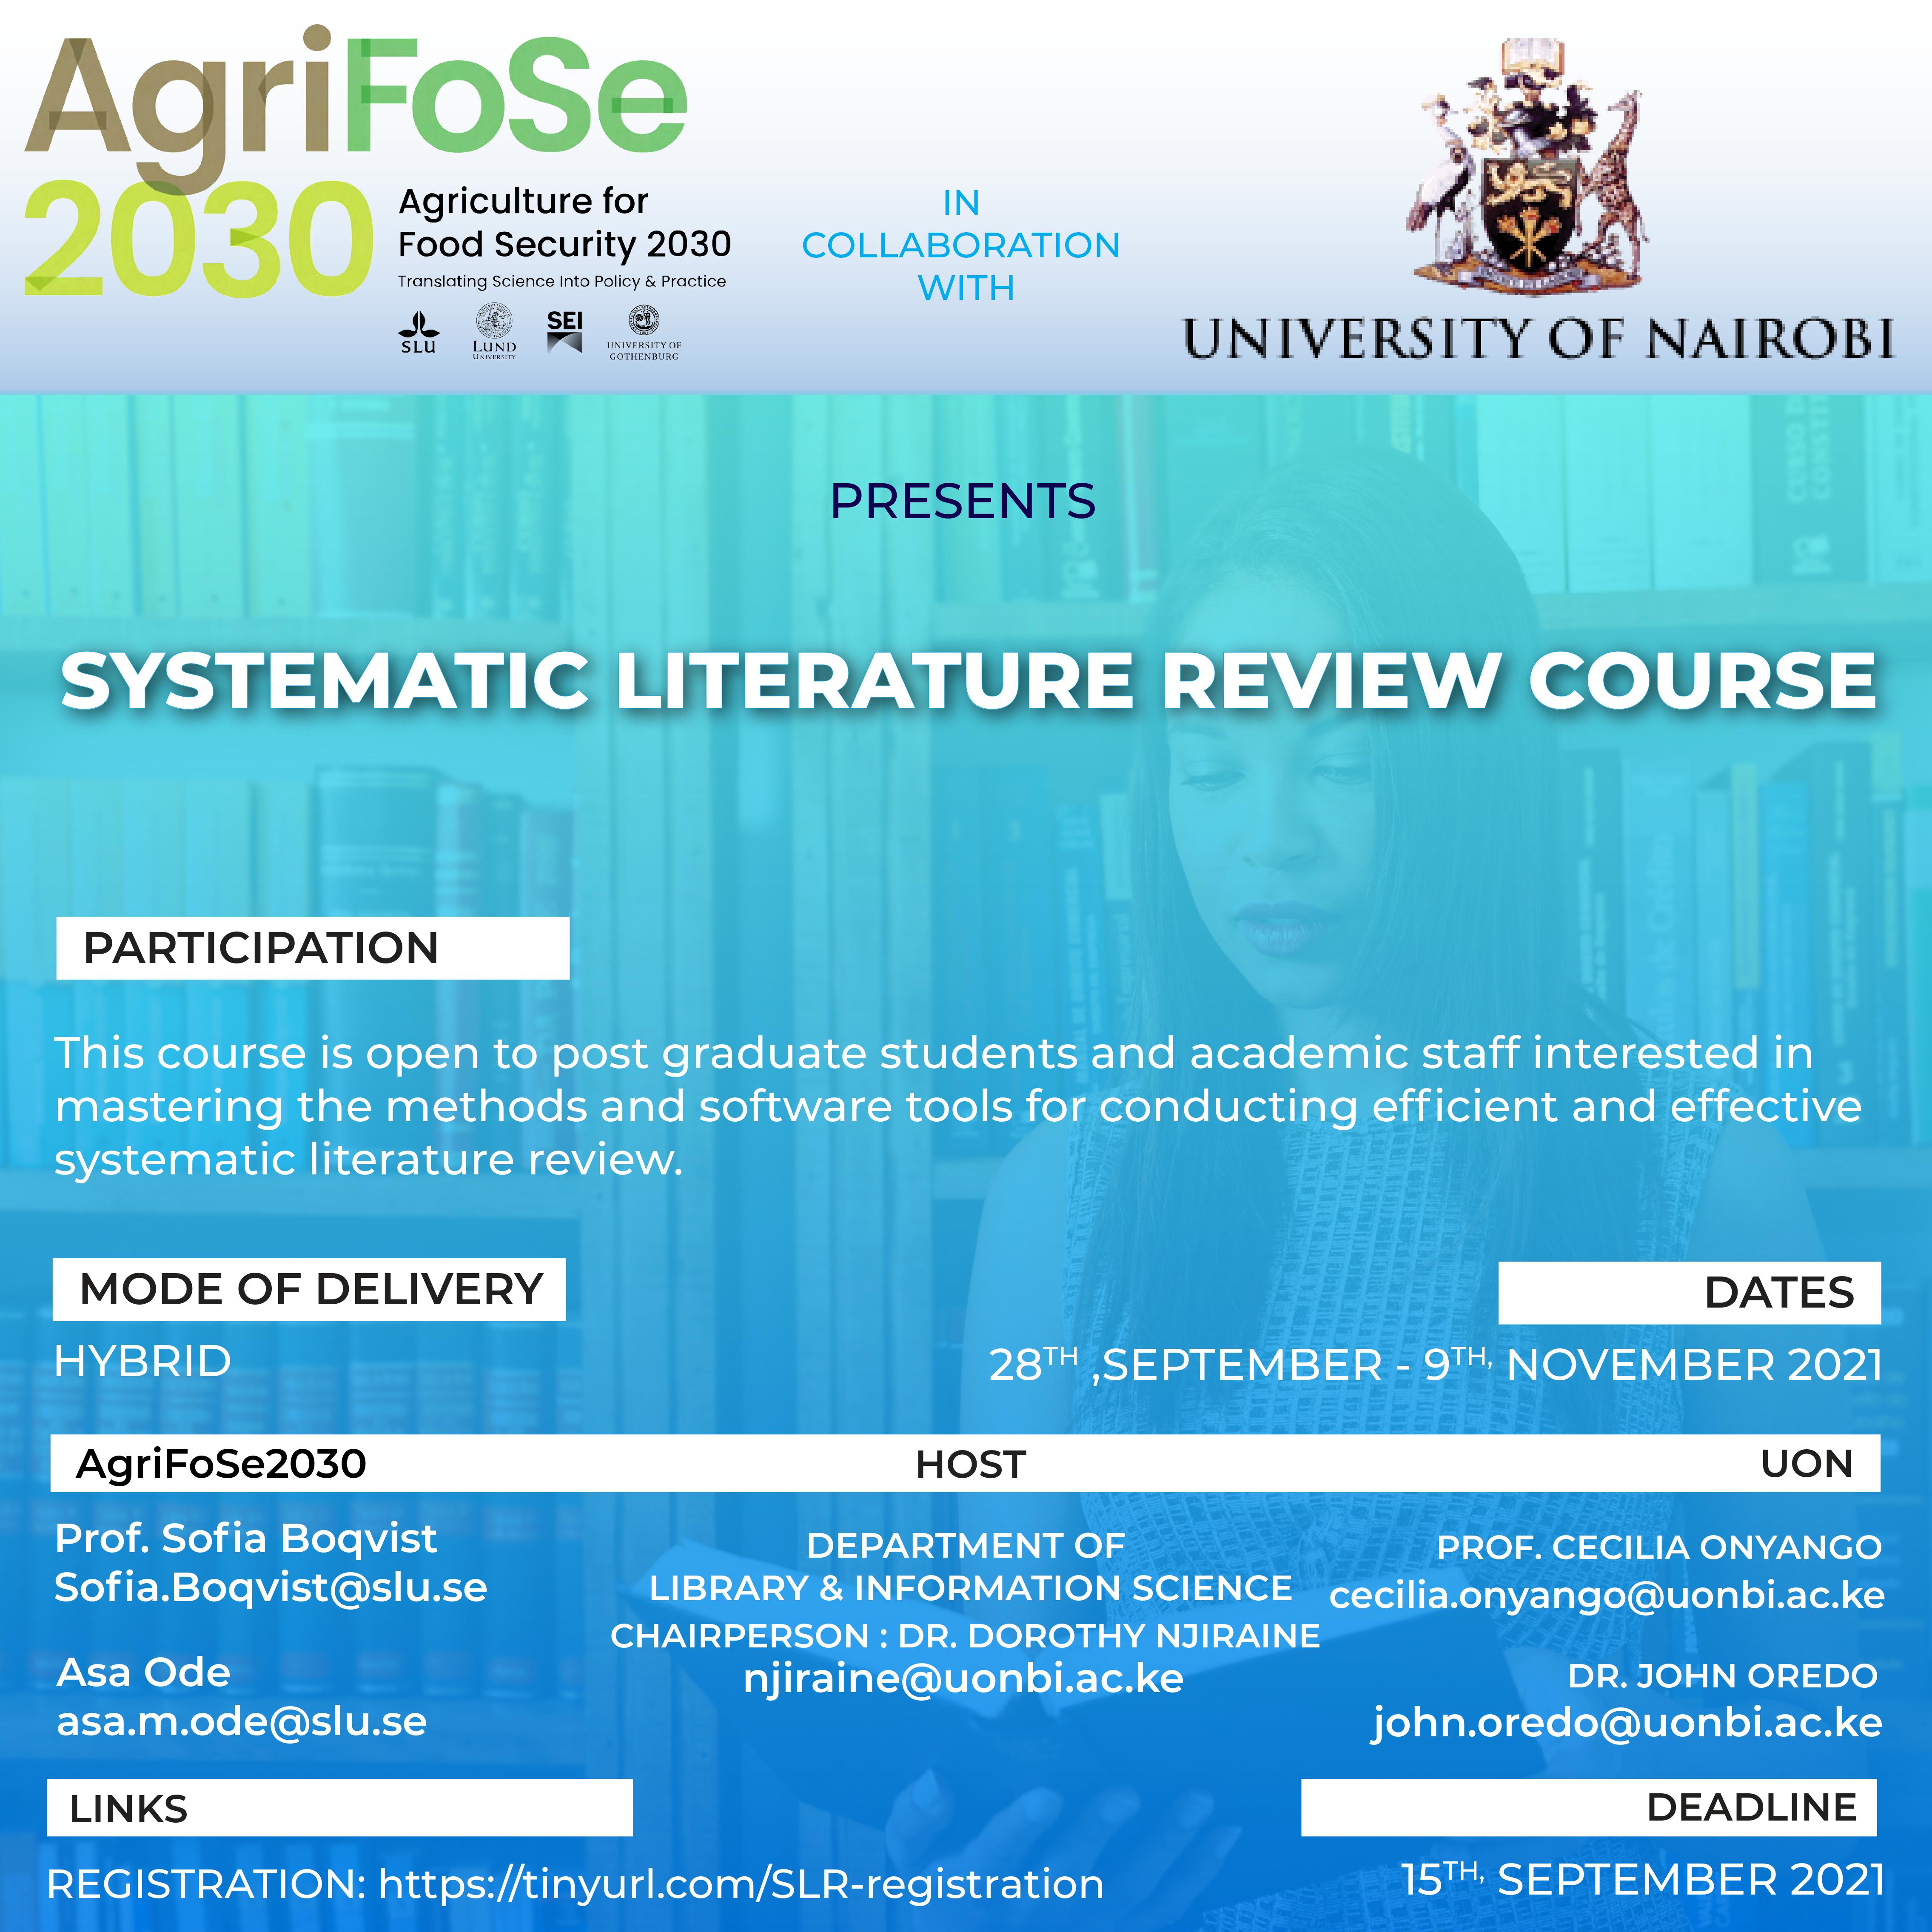 This course is open to post graduate students and academic staff interested in mastering the methods and software tools for conducting efficient and effective systematic literature review.